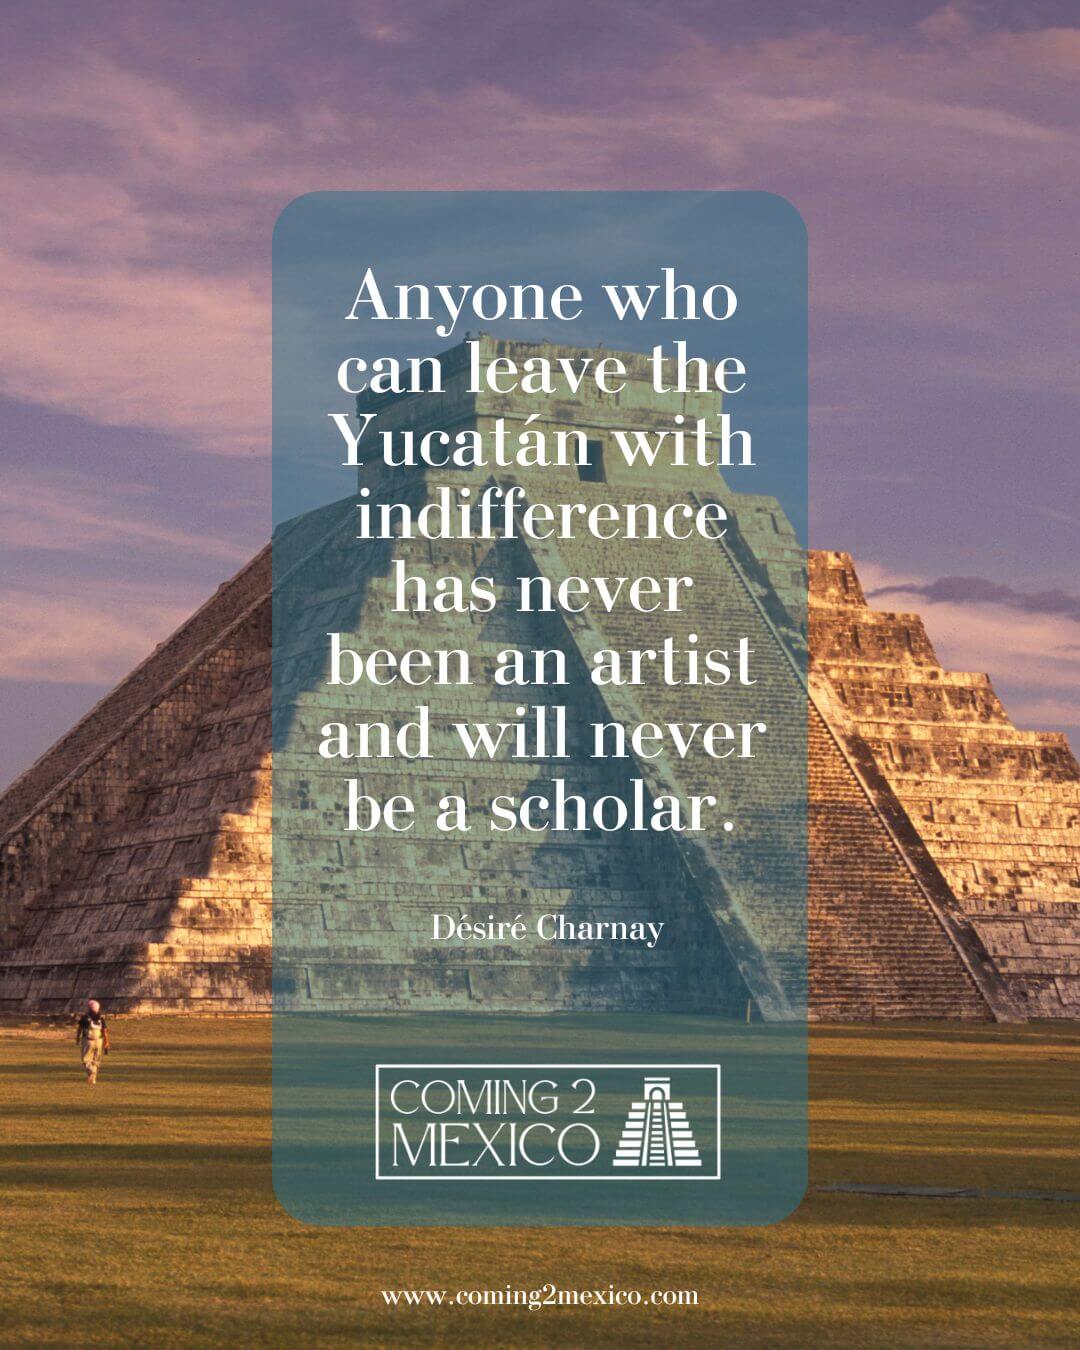 Anyone who can leave the Yucatán with indifference has never been an artist and will never be a scholar.